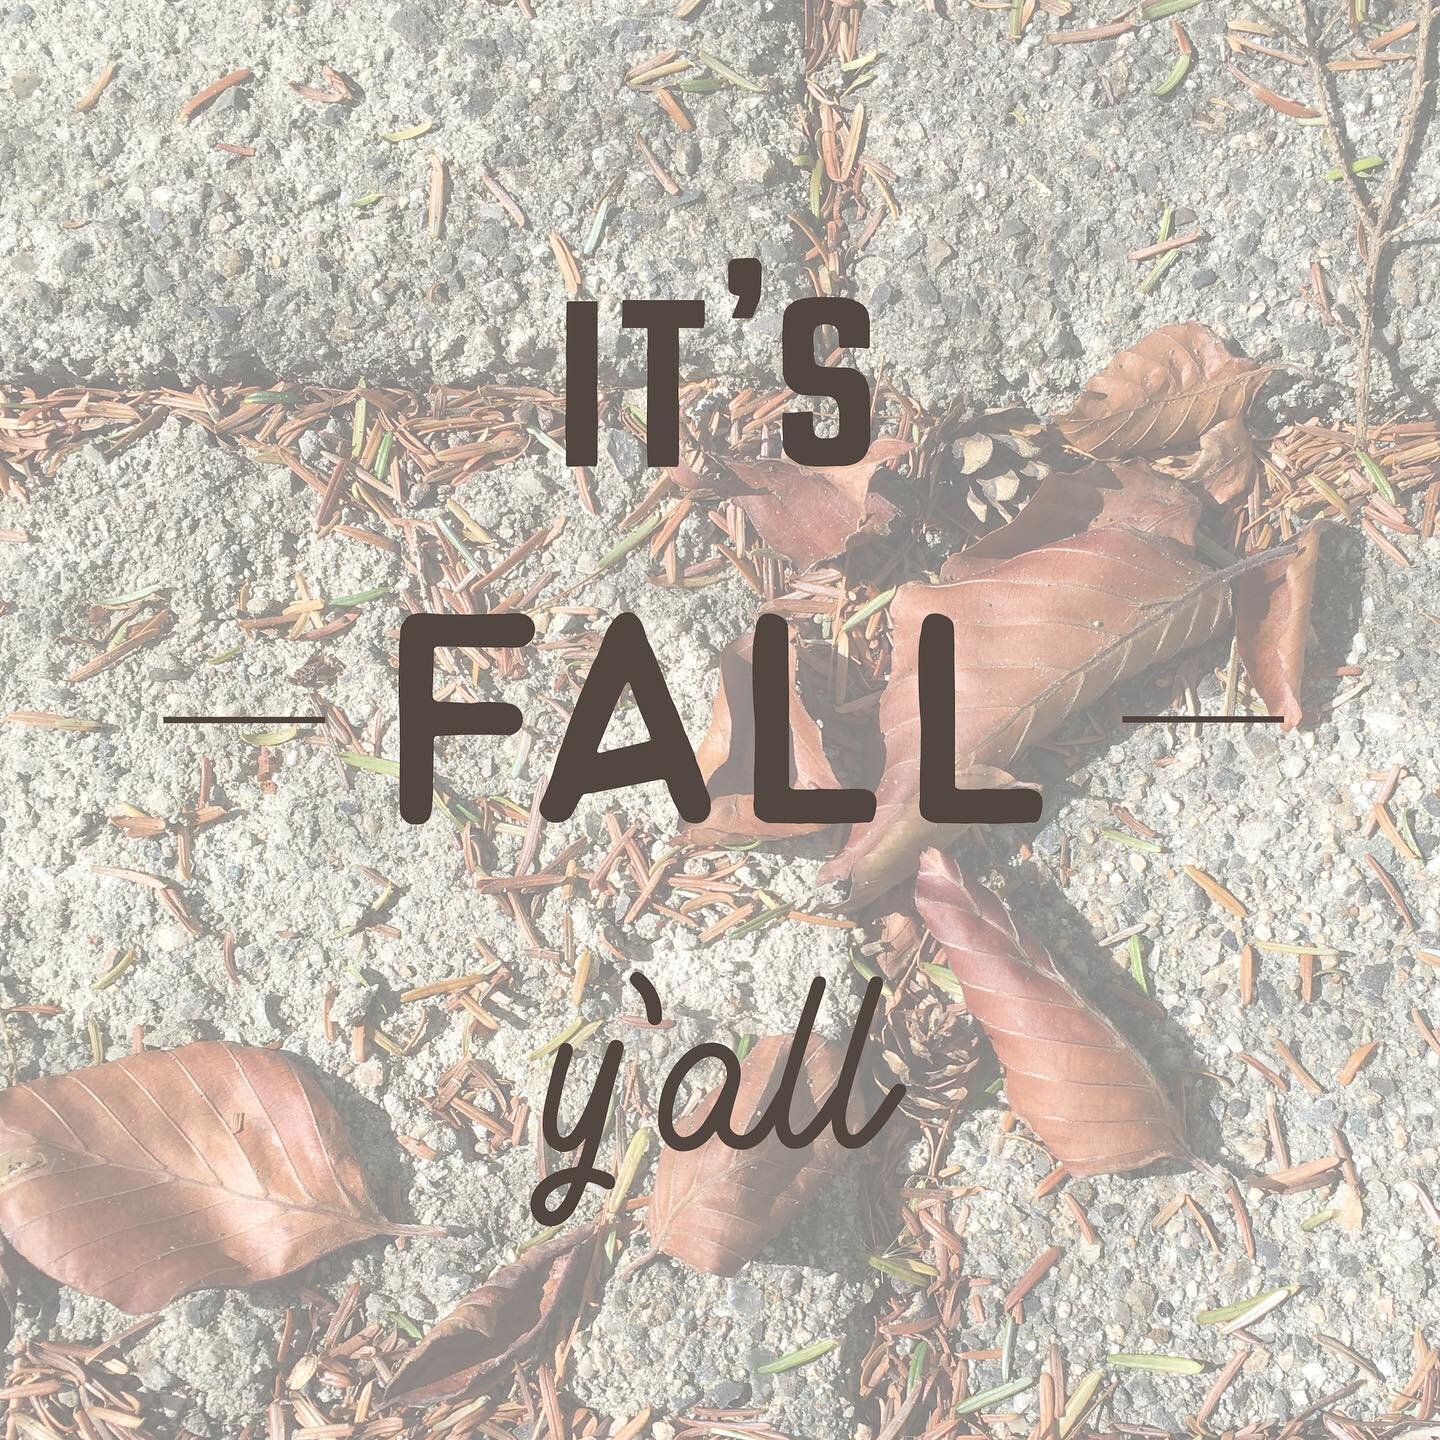 Happy Fall Equinox. It&rsquo;s fall y&rsquo;all and I for one am excited. I&rsquo;m seeing far more people posting about equinox than in the past. It&rsquo;s great to connect to the seasons and the cyclical changes in the world around us

#fall #autu